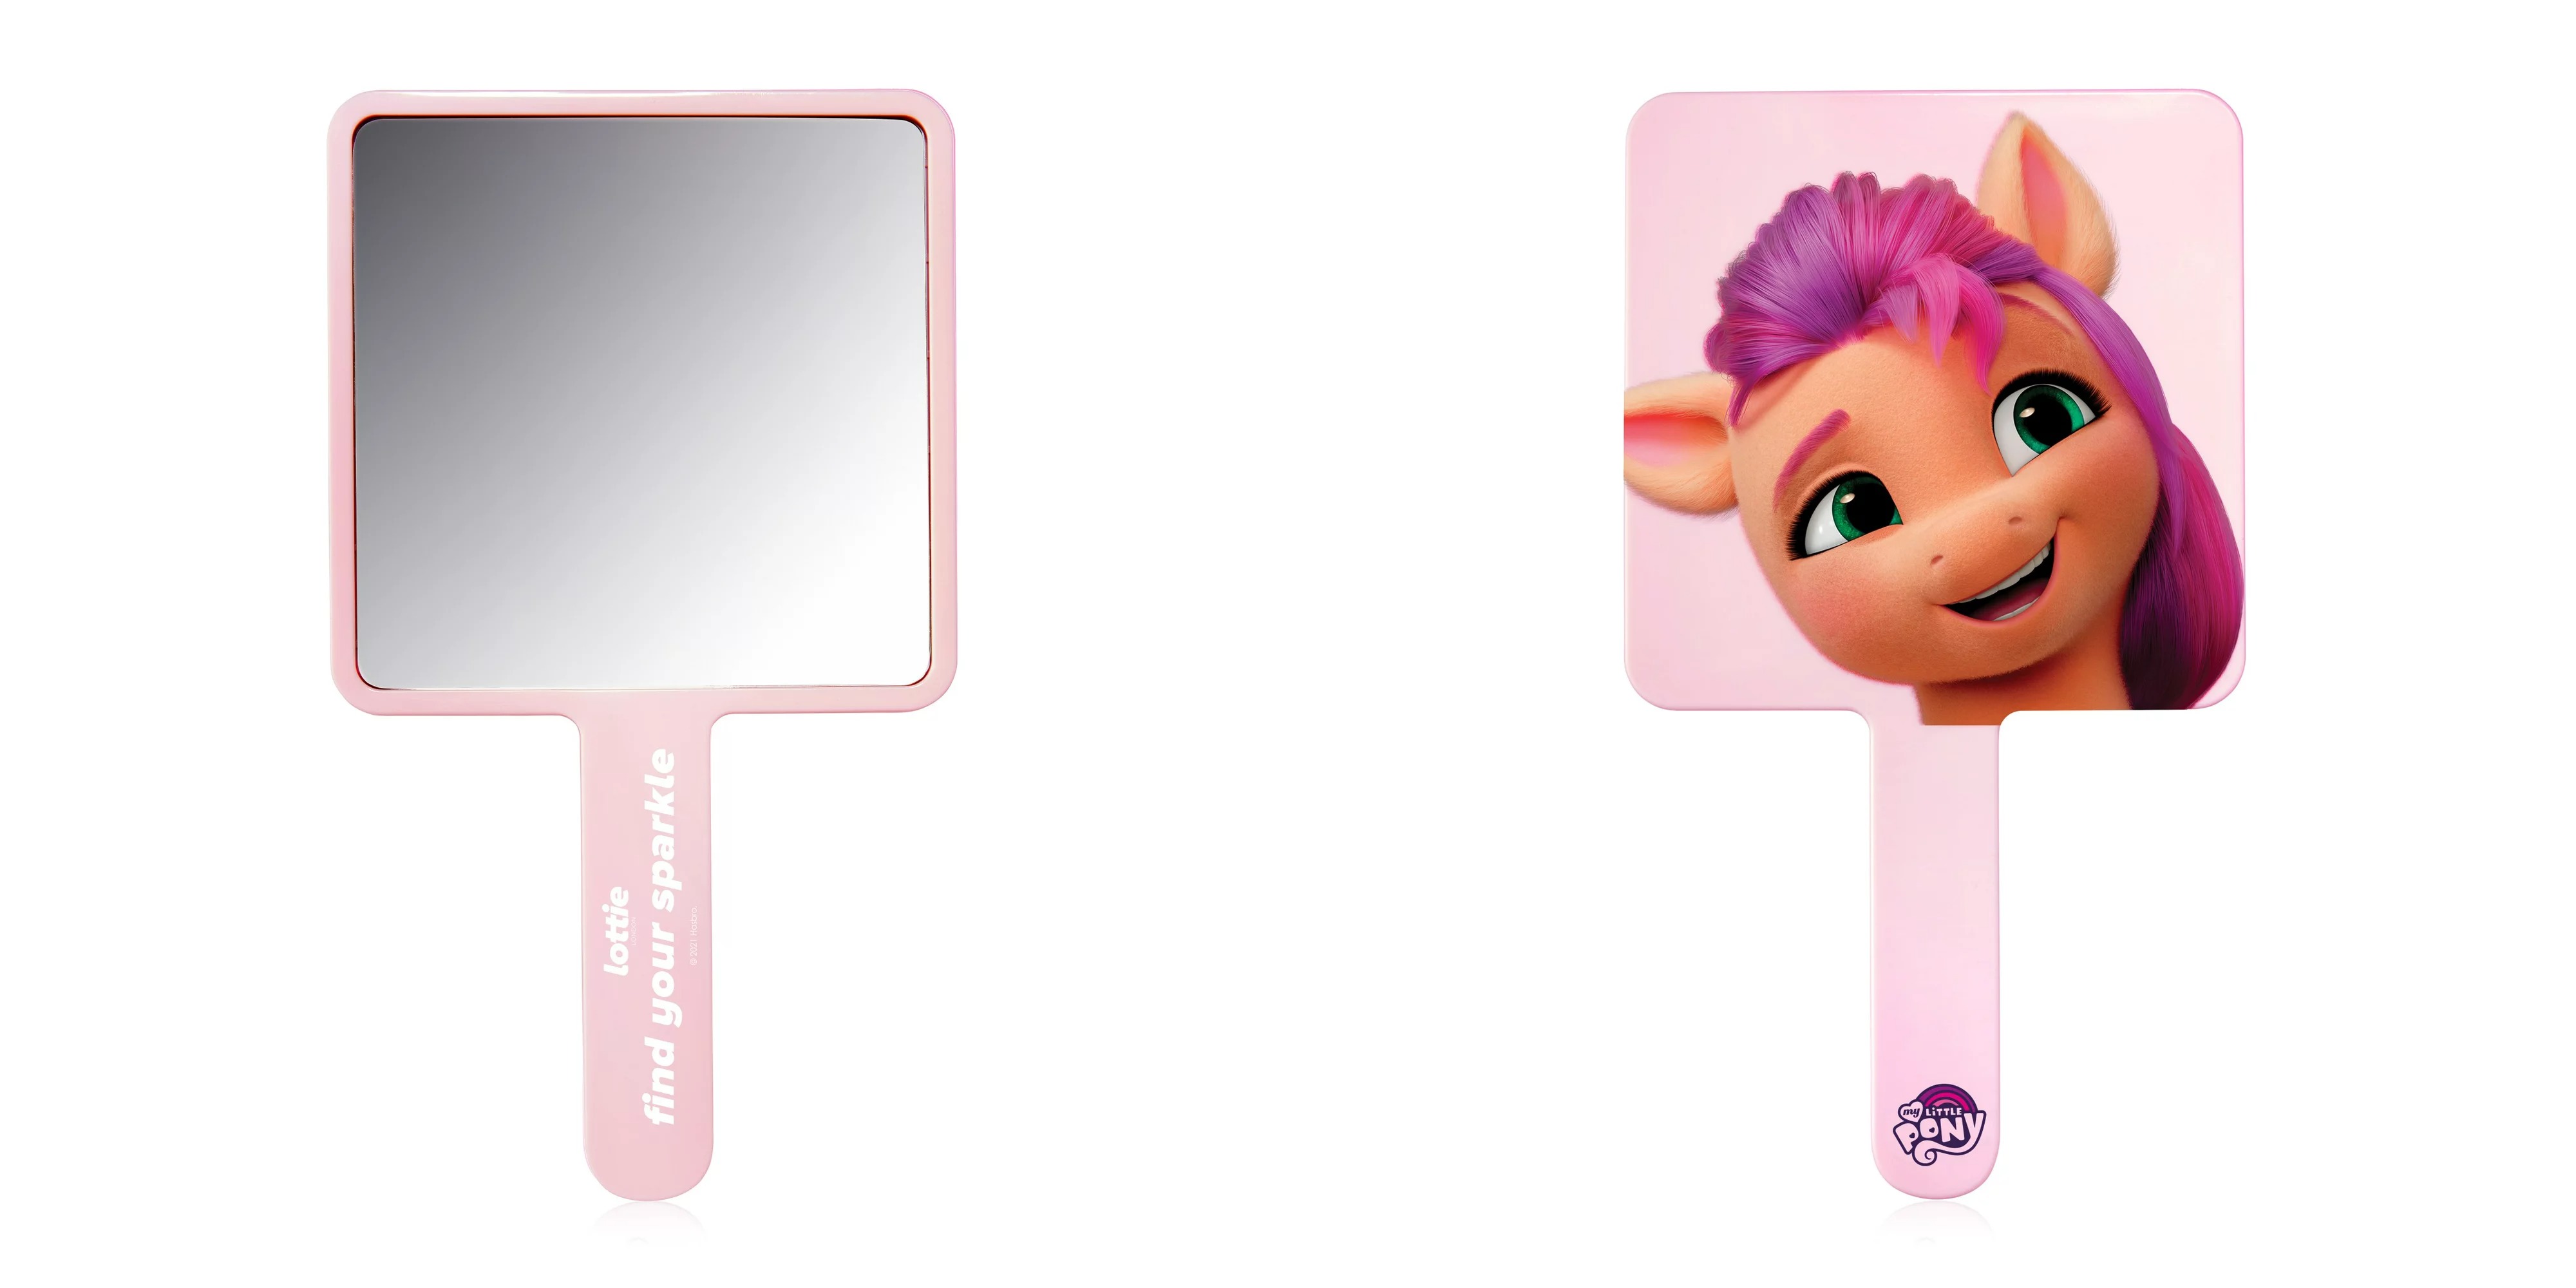 Lottie London x My Little Pony Find Your Sparkle Hand-held Mirror $2.50 + Free S&H w/ Walmart+ or $35+